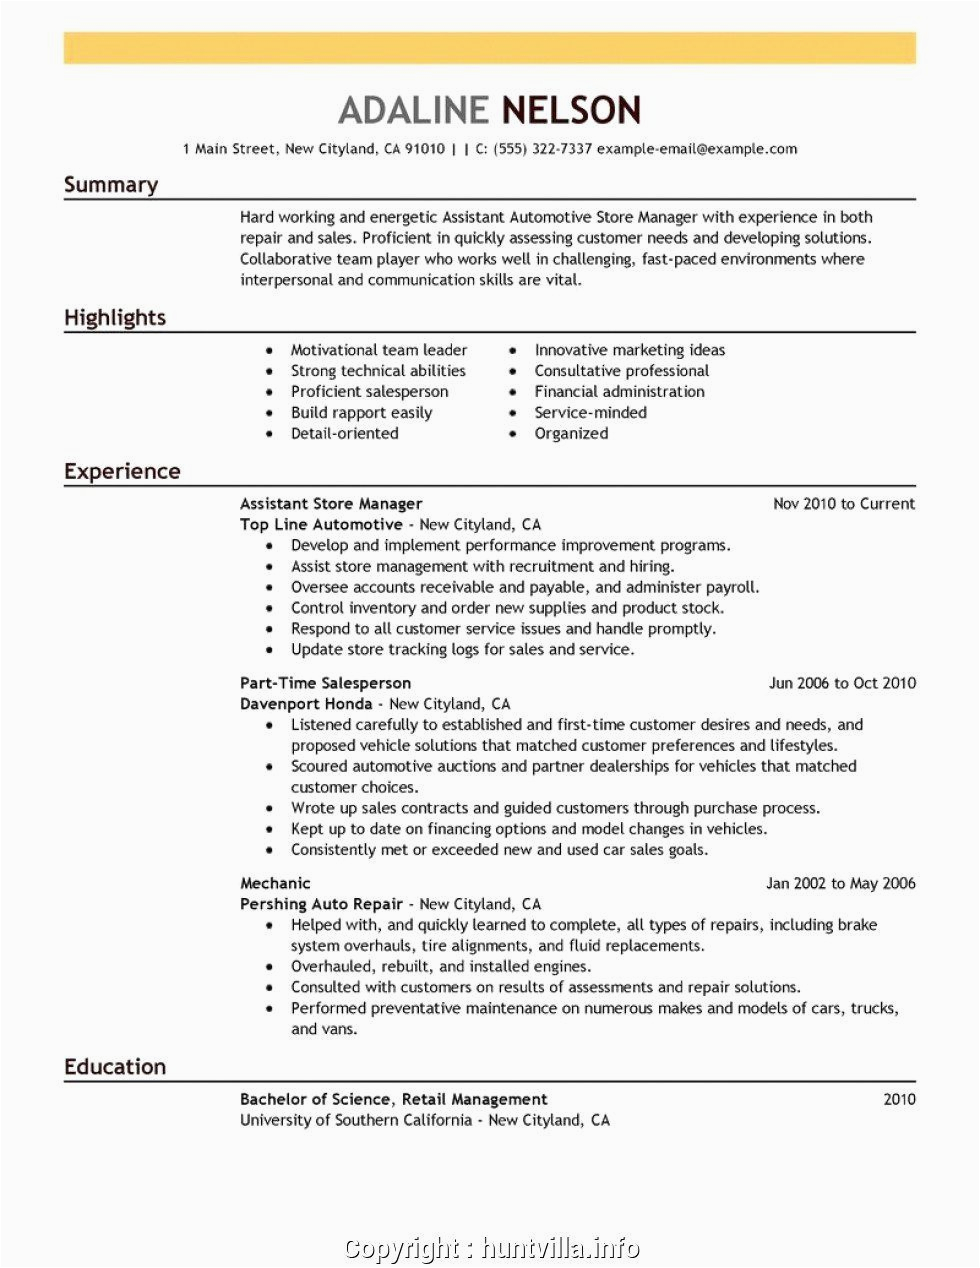 Sample Resume for Sales Lady In Department Store assistant Store Manager Resume Elegant Print Store Manager